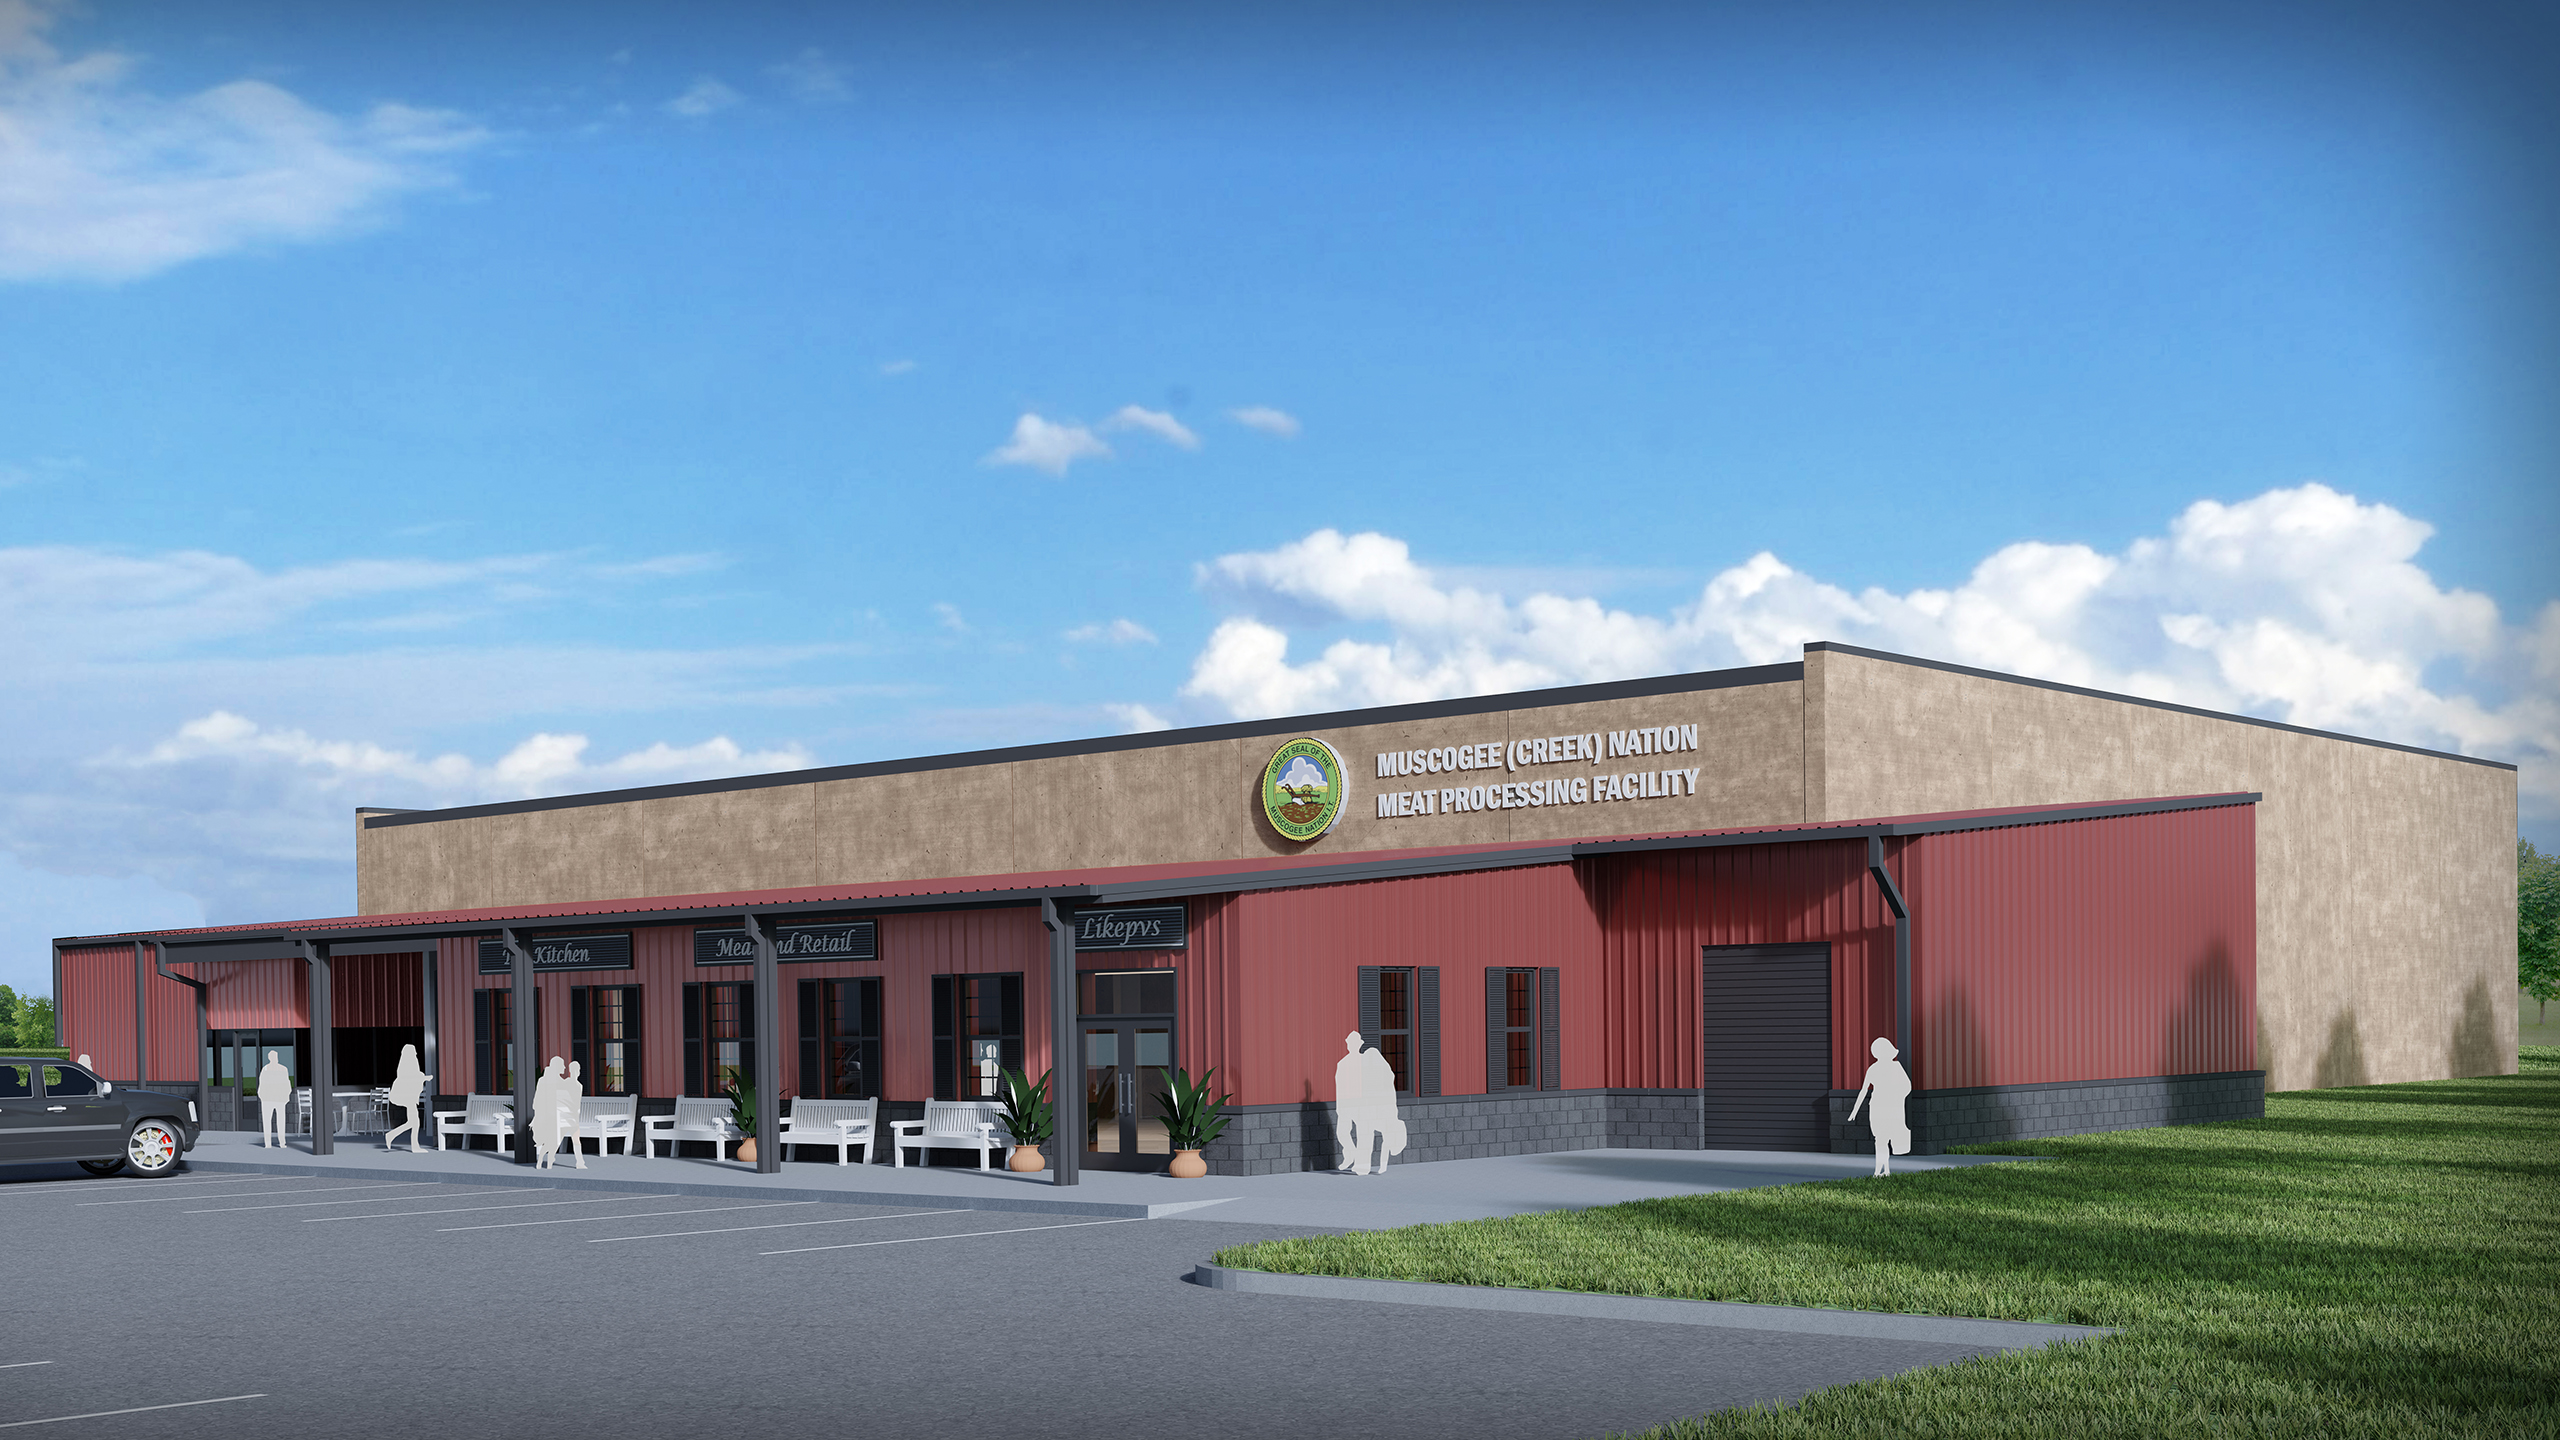 Exterior rendering of the Muscogee Nation's Meat Processing Facility